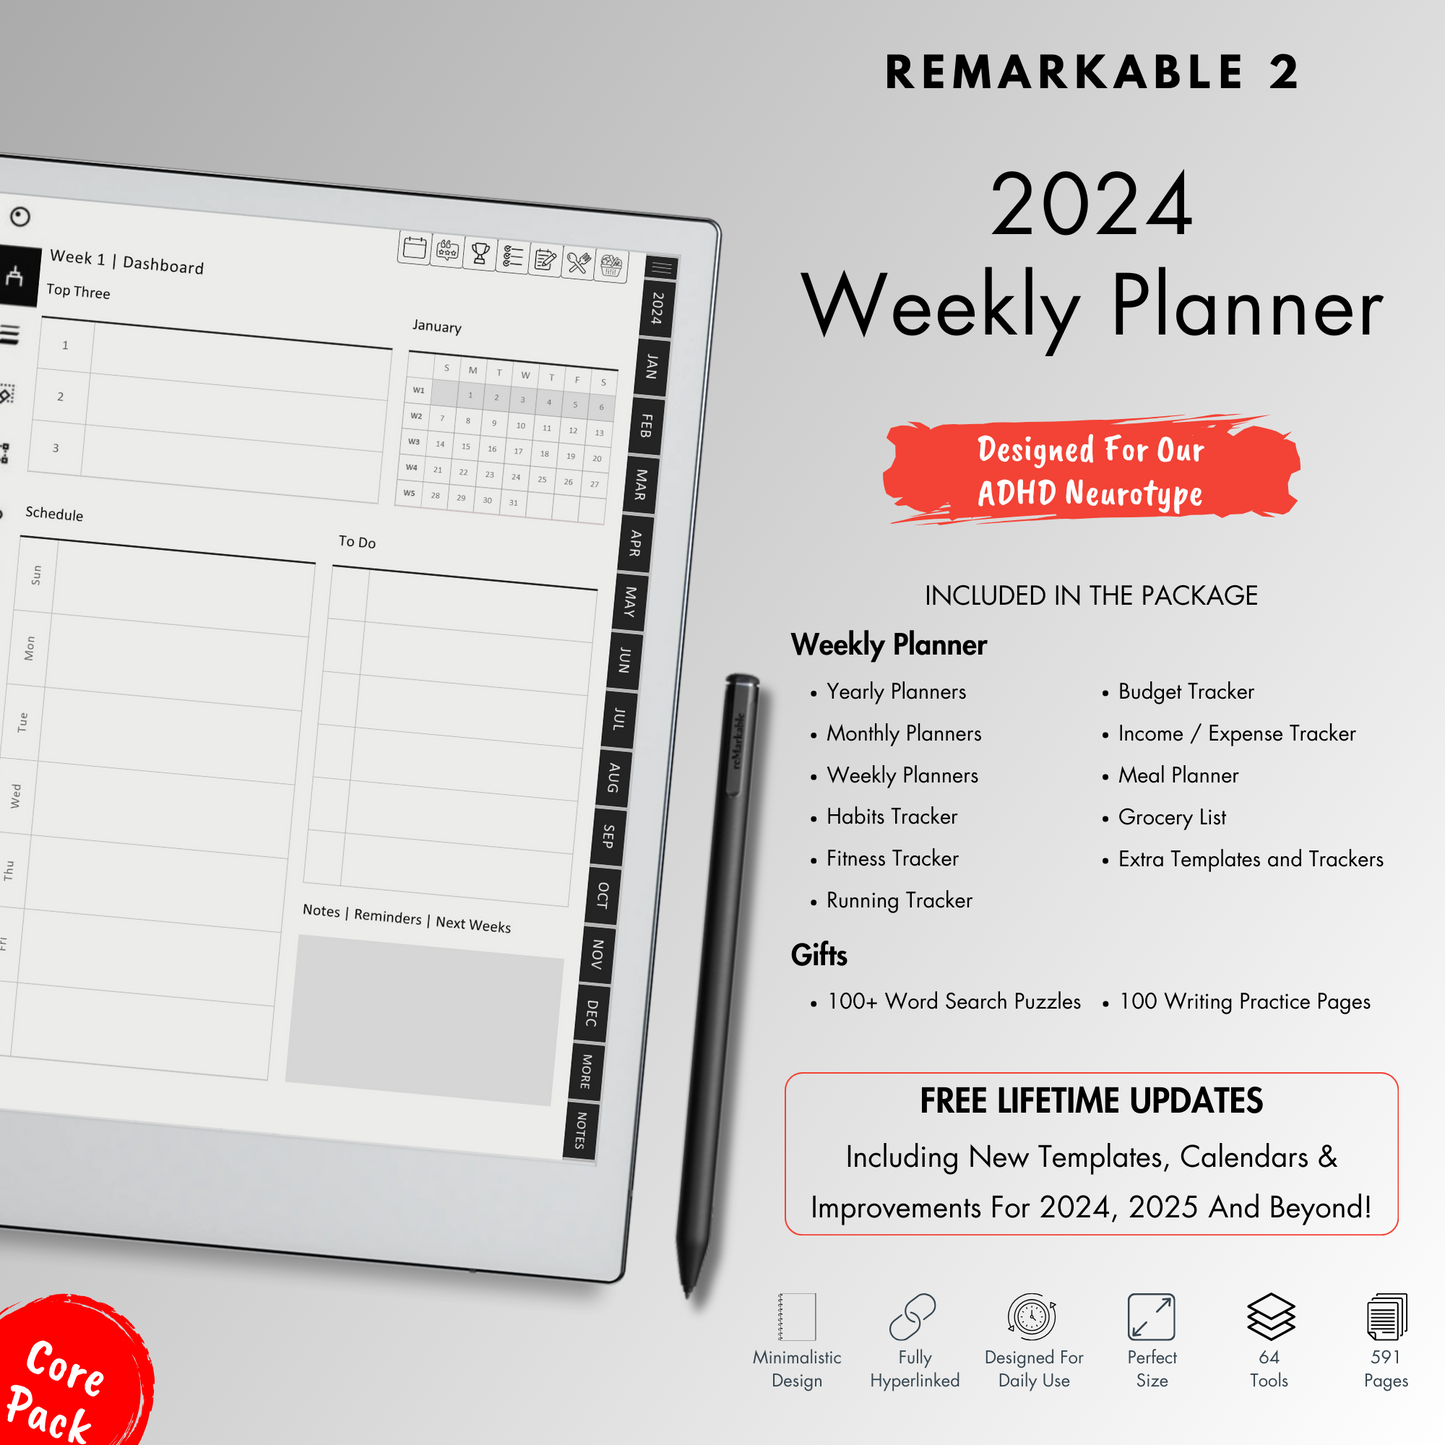 Weekly Planner 2024 for Remarkable 2.